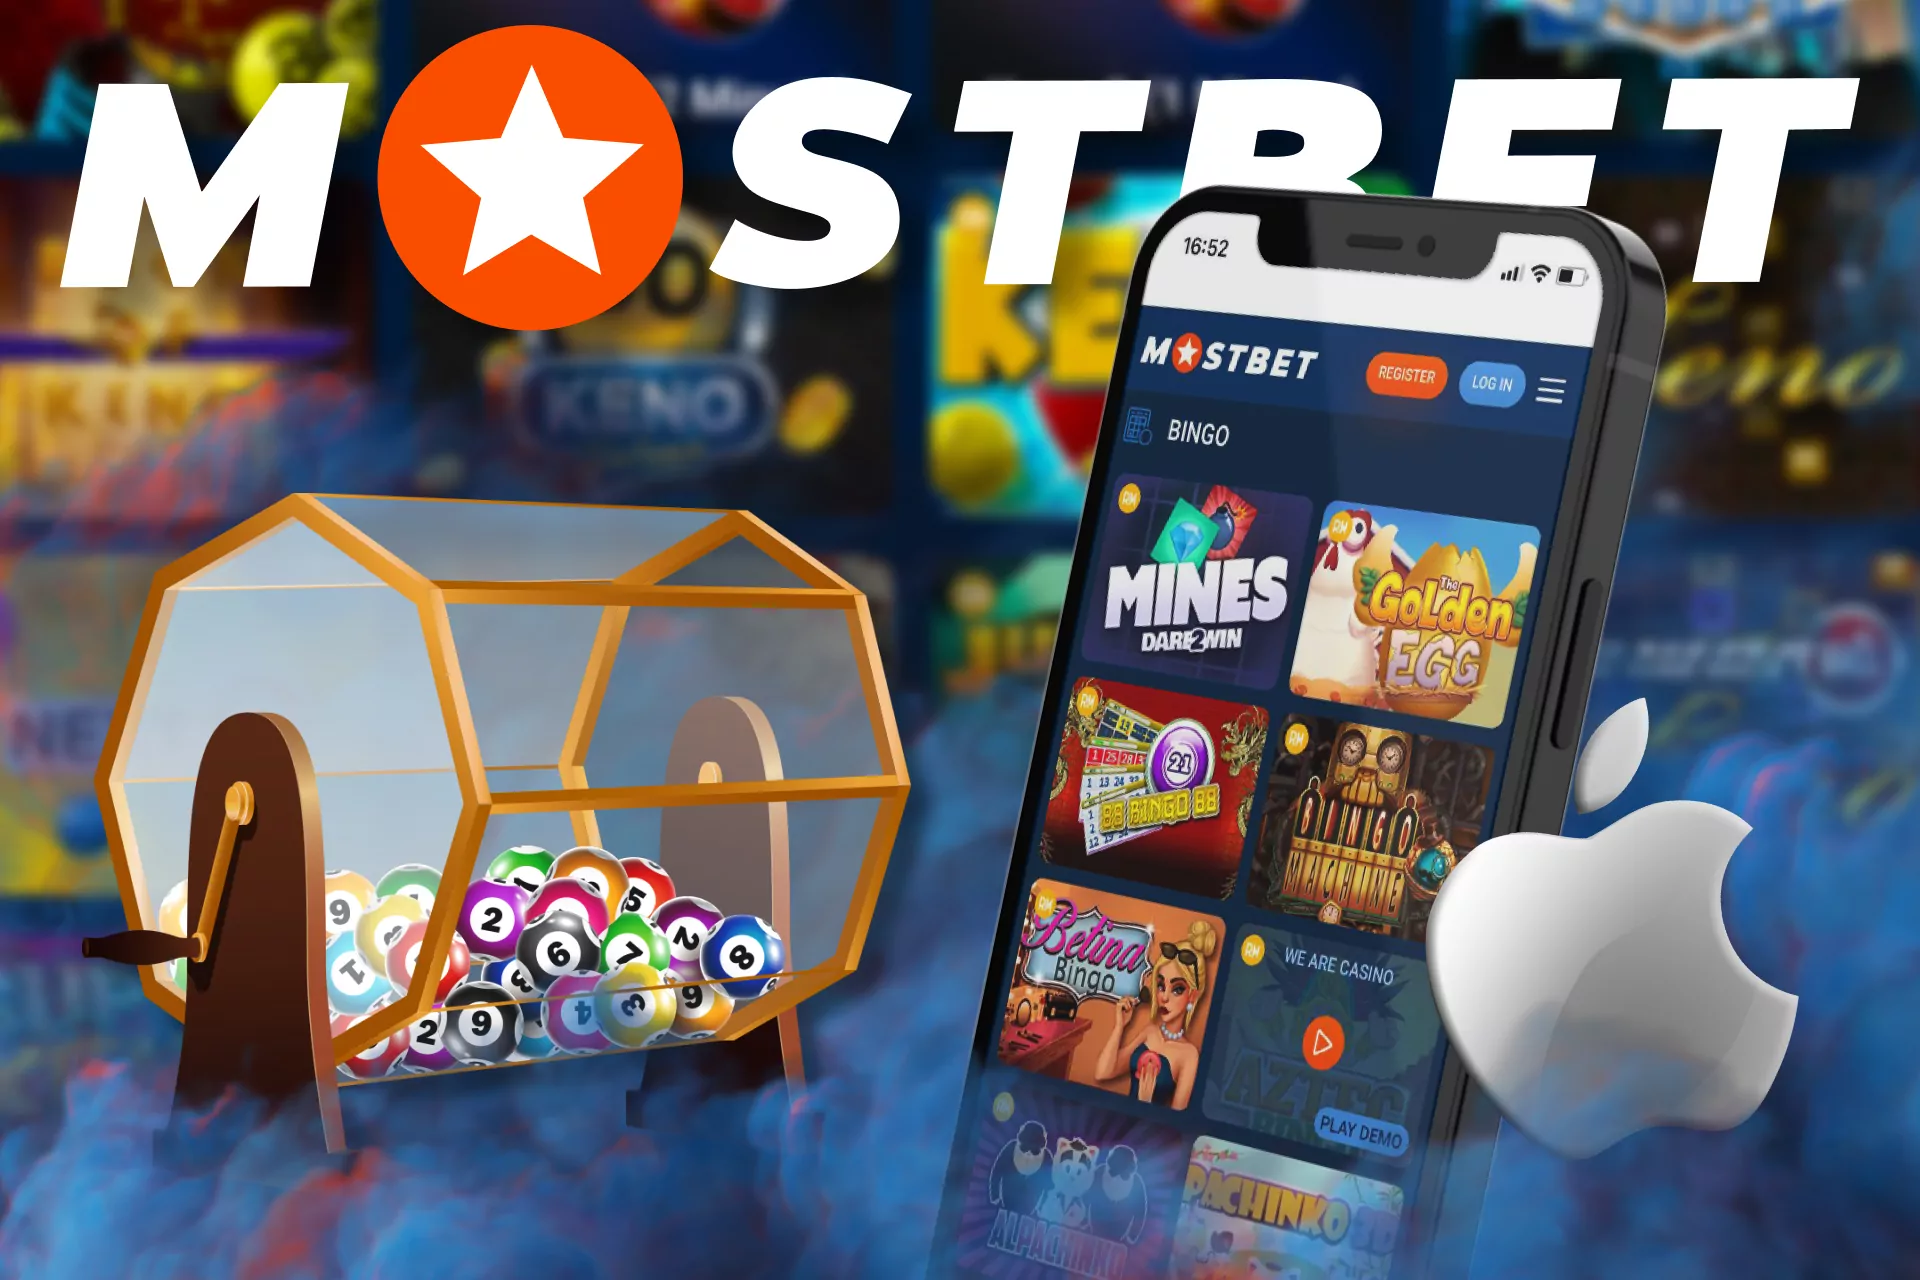 Play lotteries anywhere on your iOS device with Mostbet.